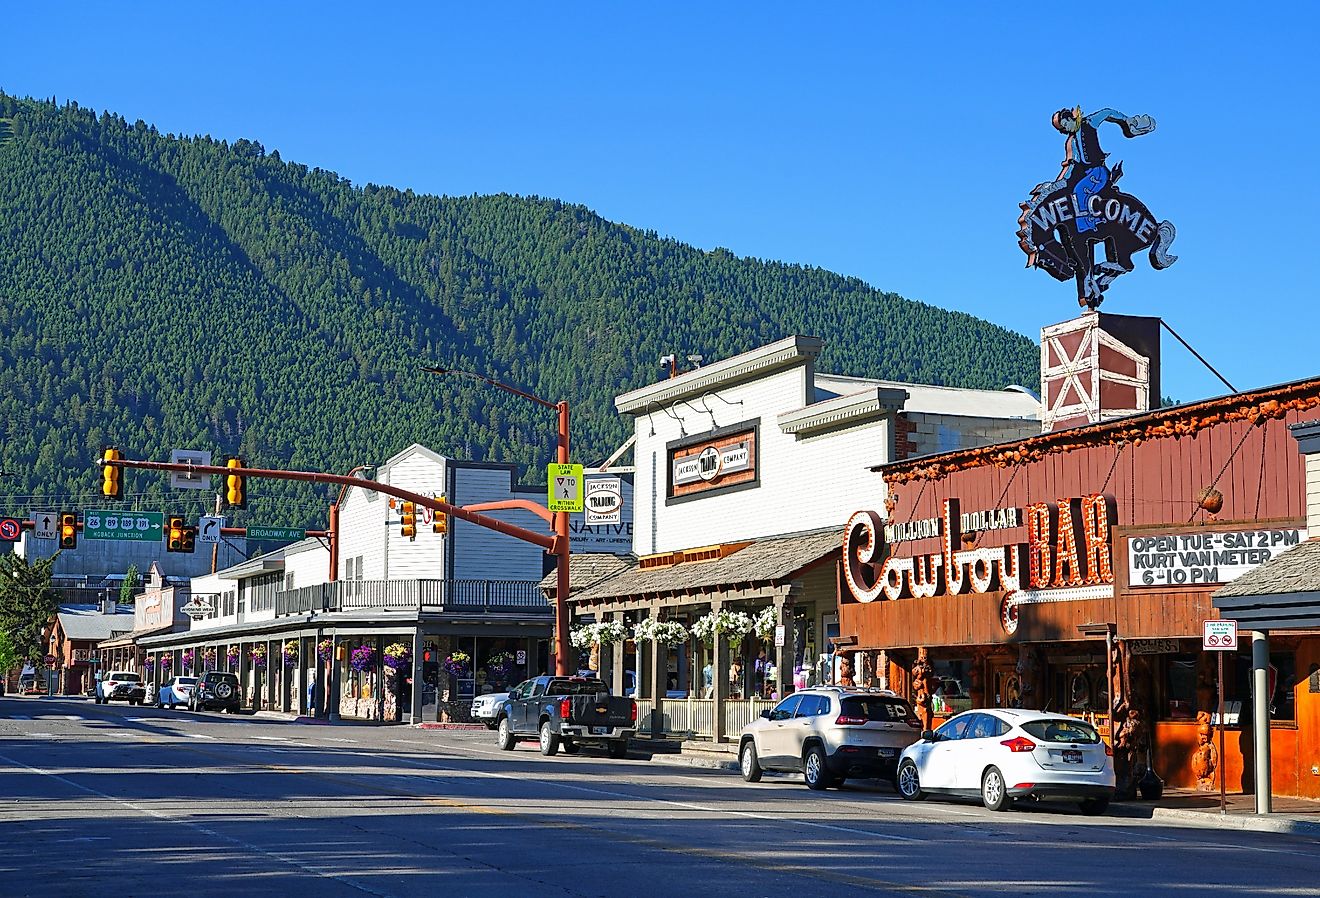 Downtown Jackson Hole, Wyoming. Image credit EQRoy via Shutterstock